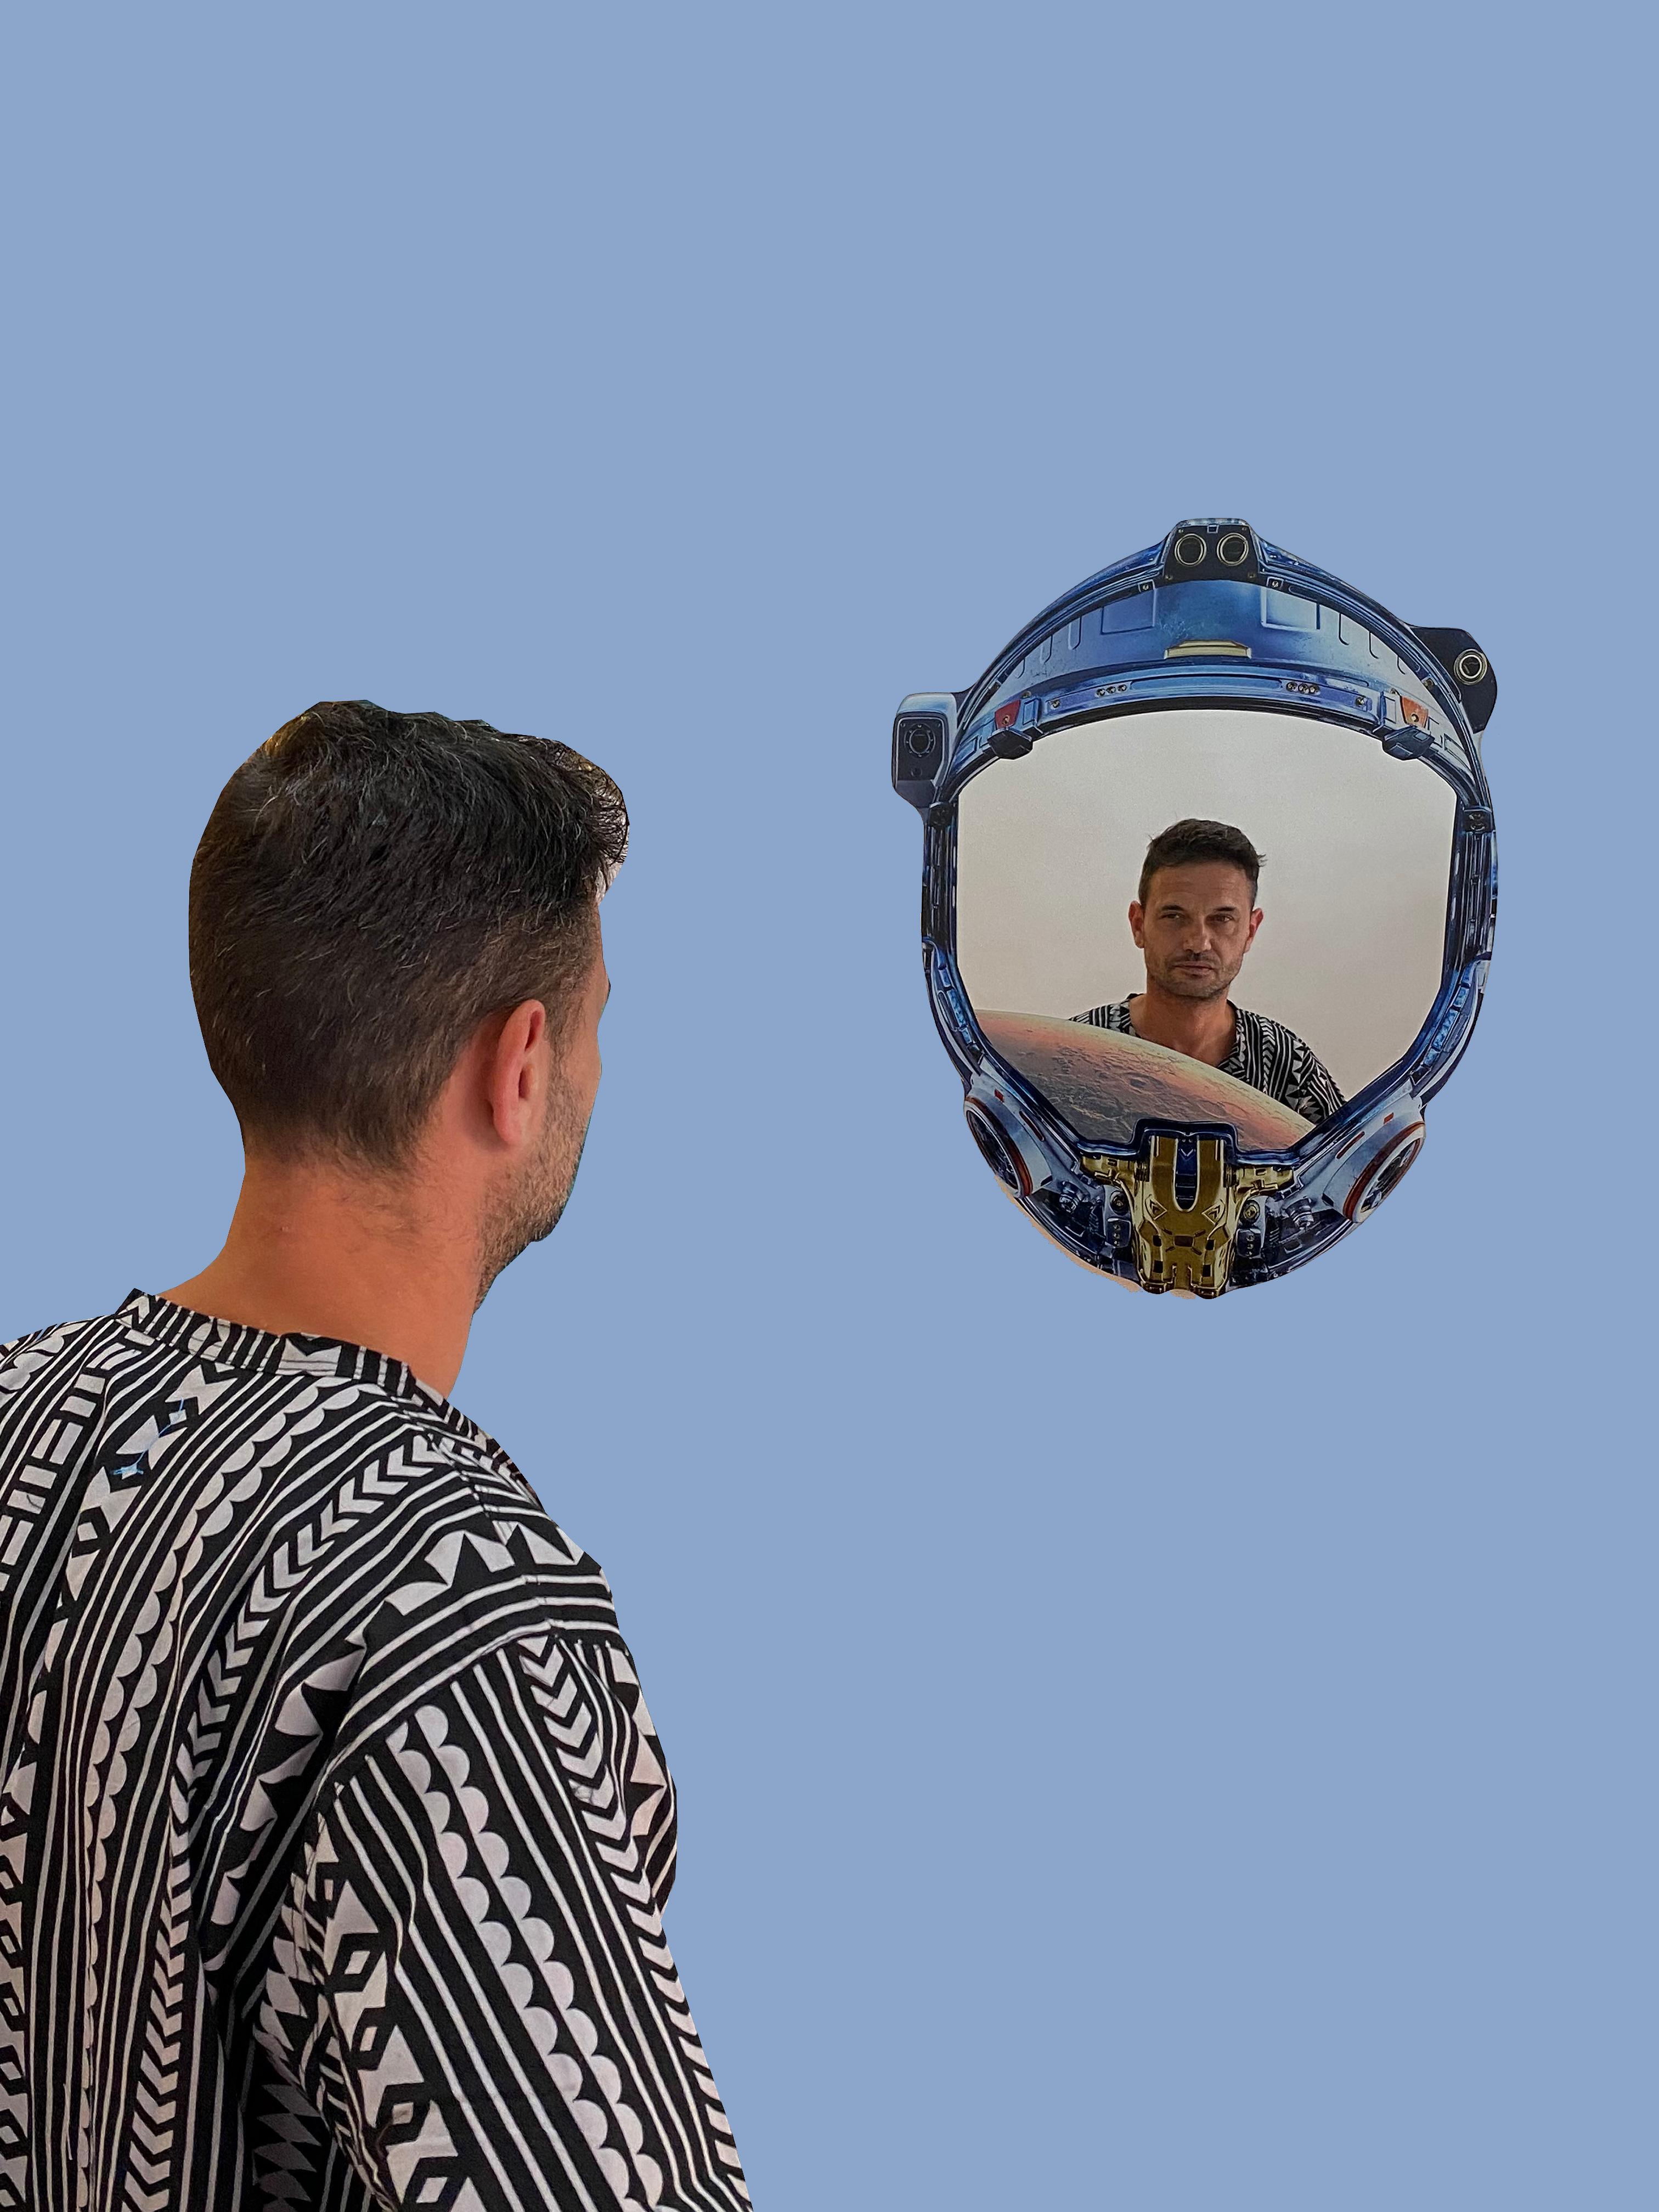 Modern Space Cowboy N°9/30, Contemporary Wall Mirror with Printed Astronaut Helmet For Sale